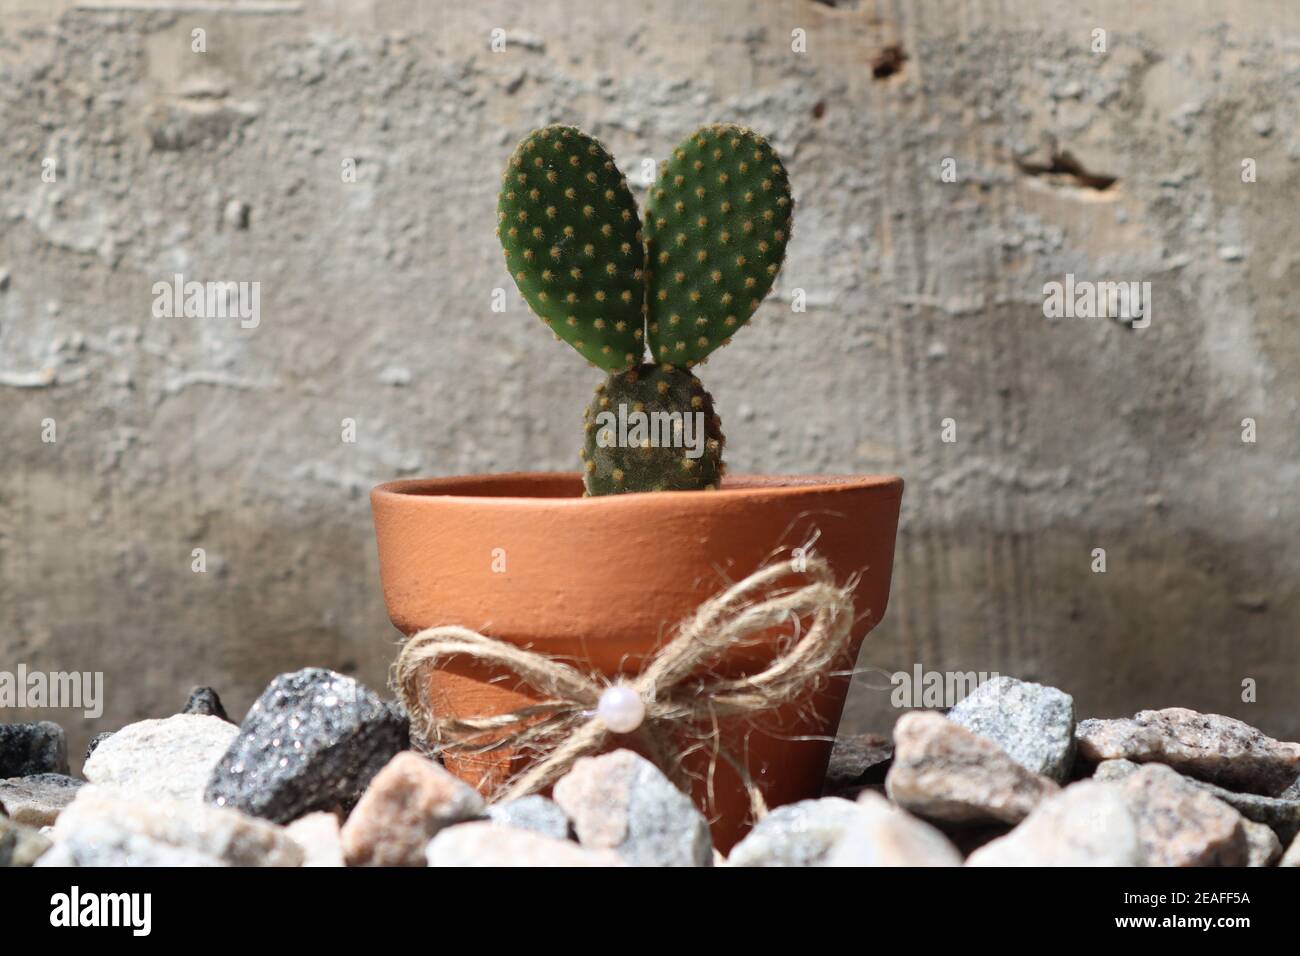 This small cactus tree with two leaves standing in front of various backgrounds shows us a cute look. It is in a tiny clay pot. Stock Photo